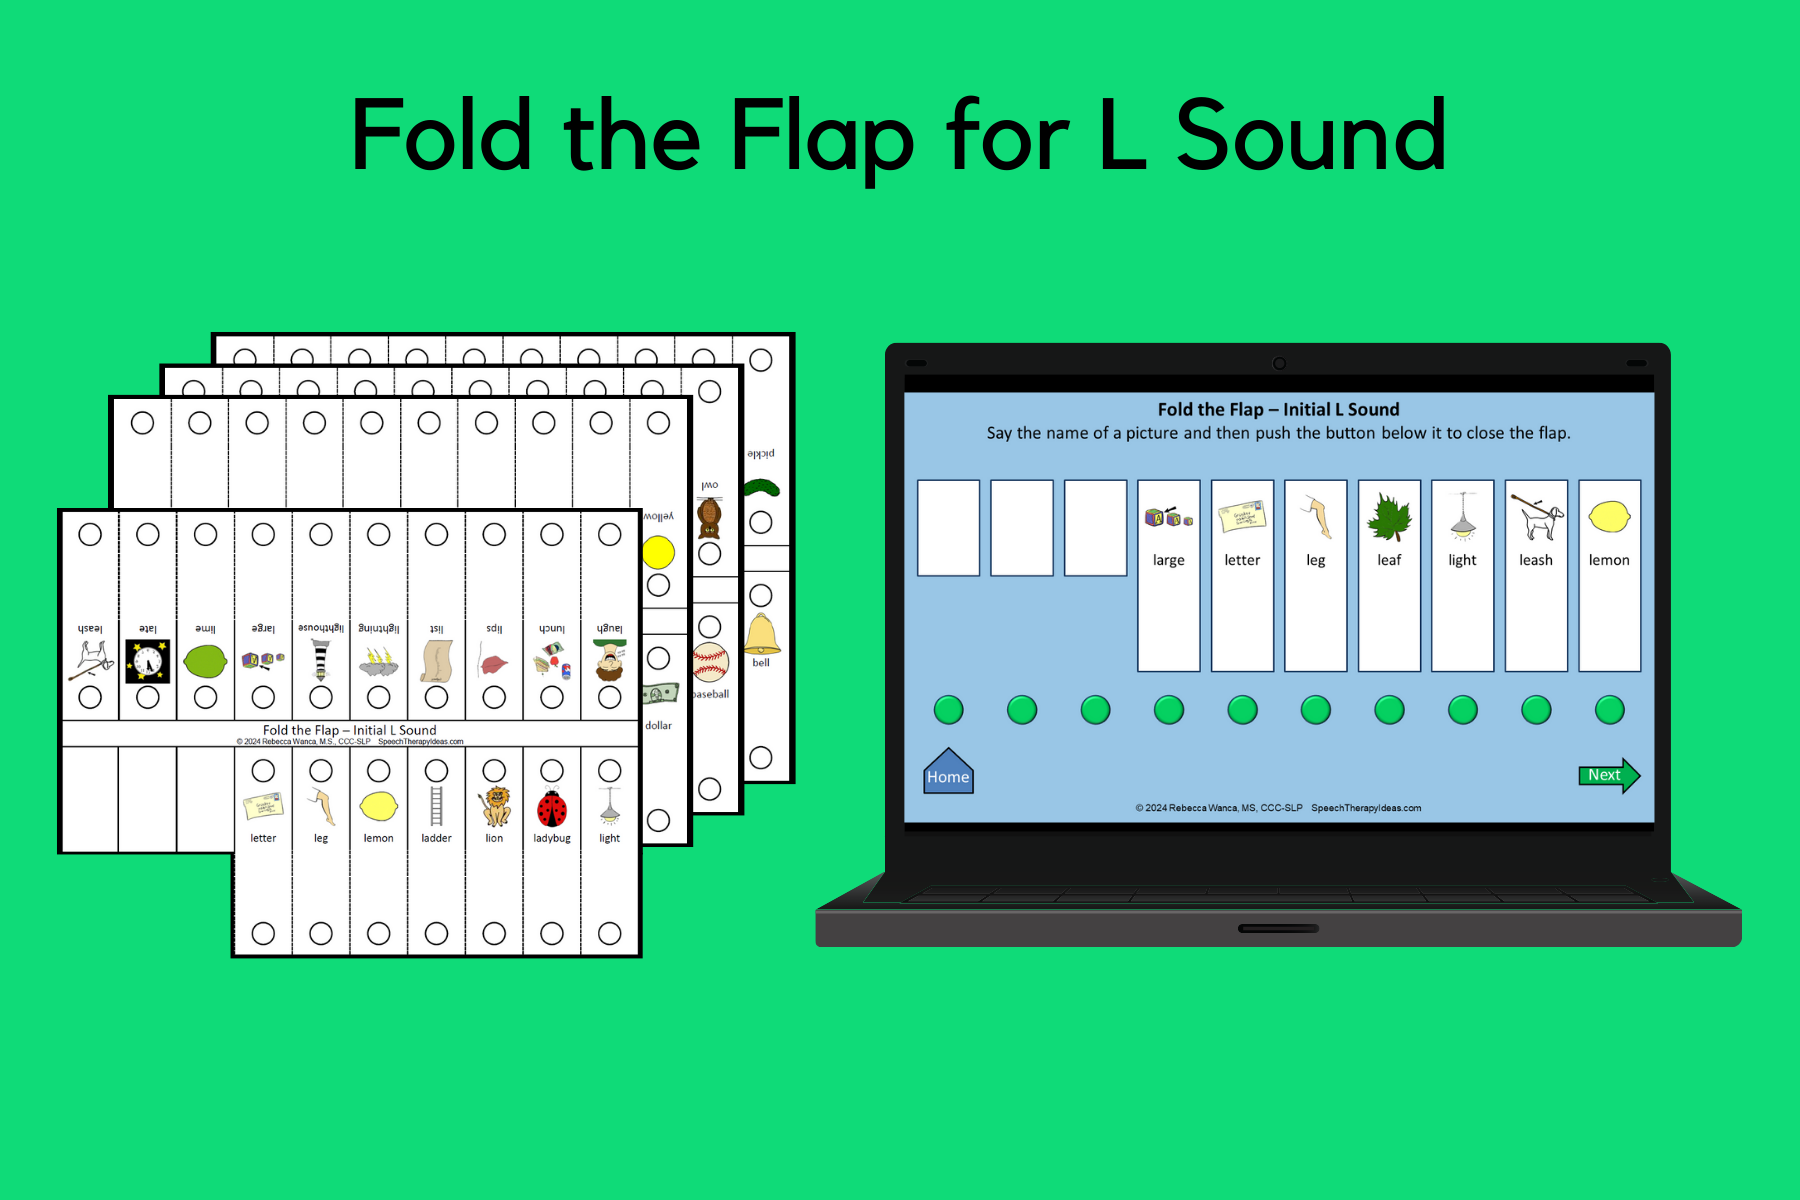 Fold the Flap for L Sound